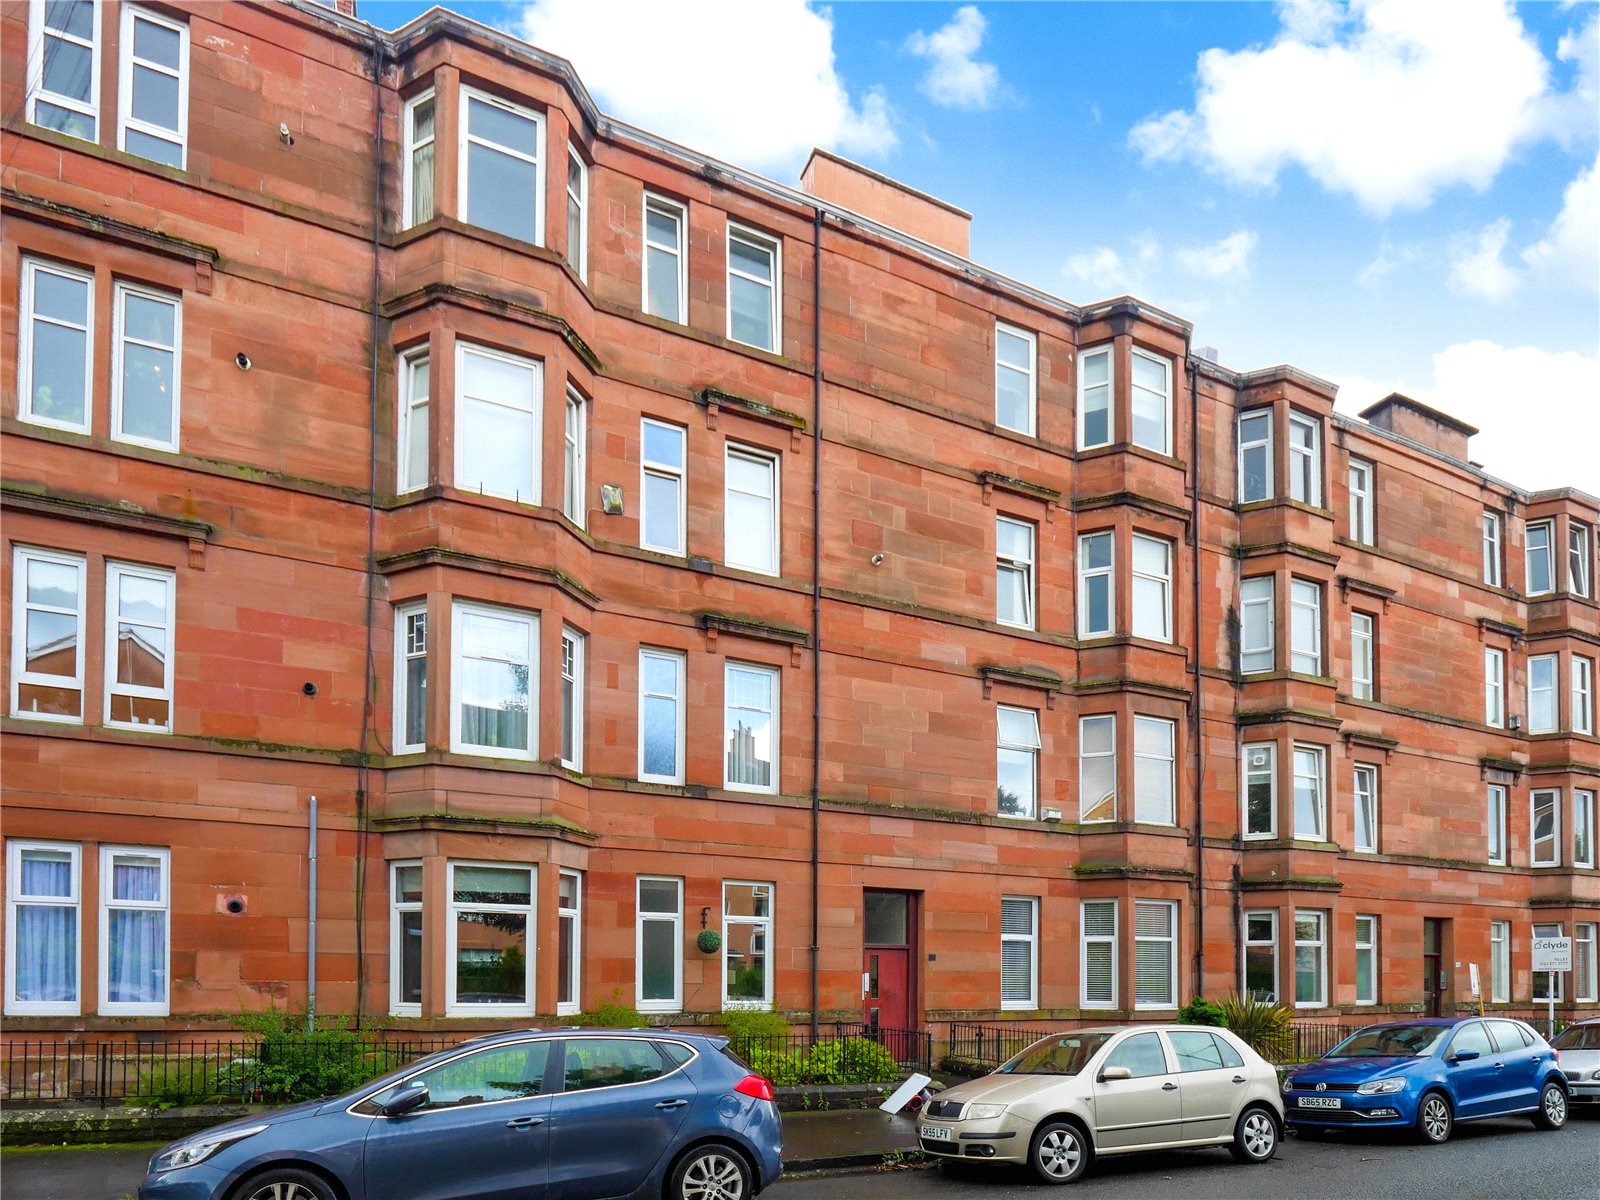 Our latest properties for sale and to let (15th August 2019)